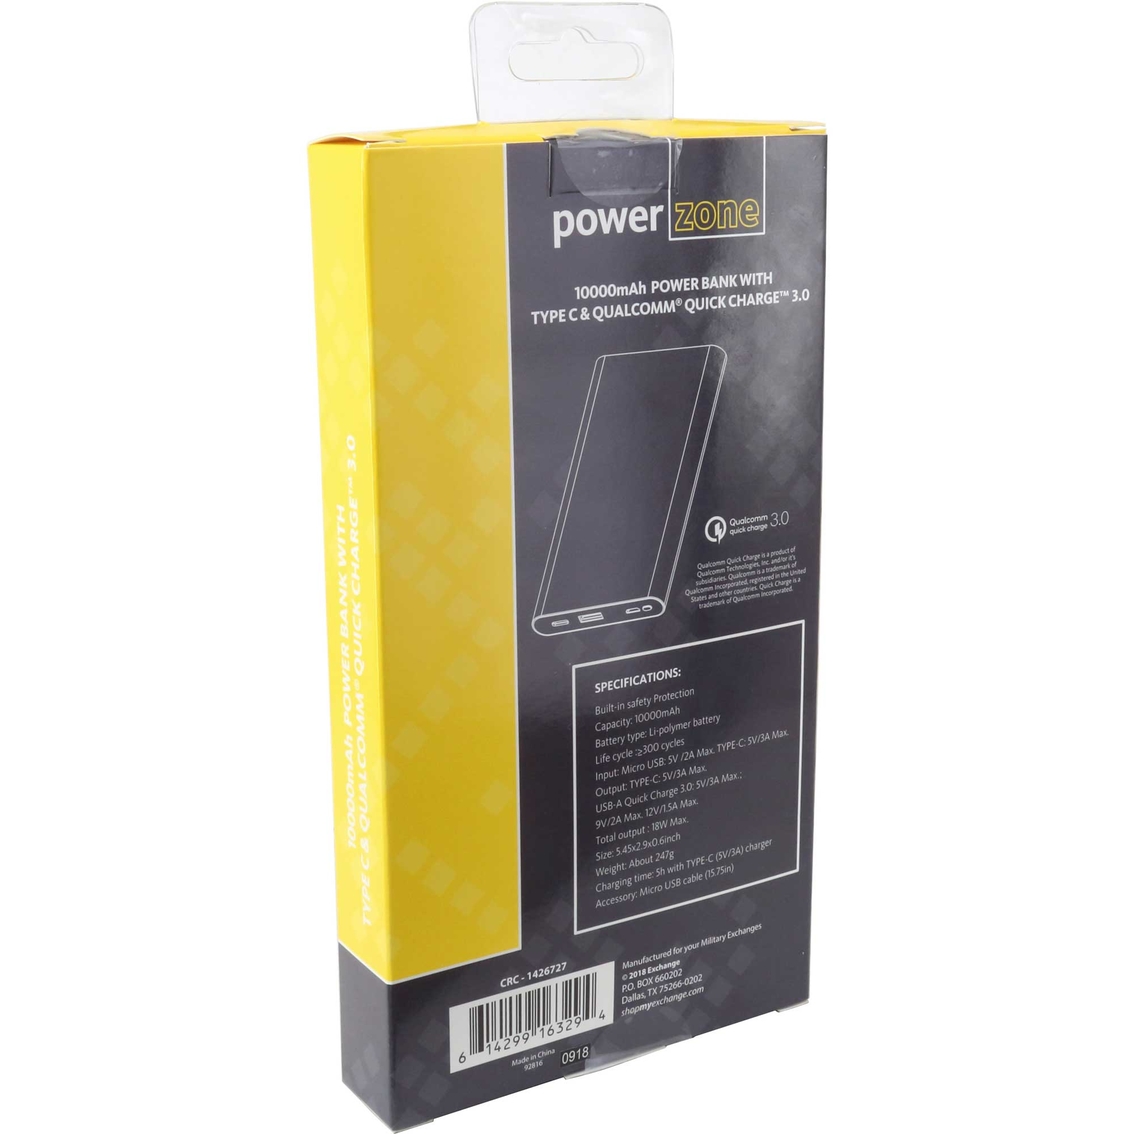 Powerzone 10000mAh Power Bank with Type C and Qualcomm Quick Charge 3.0 - Image 2 of 4